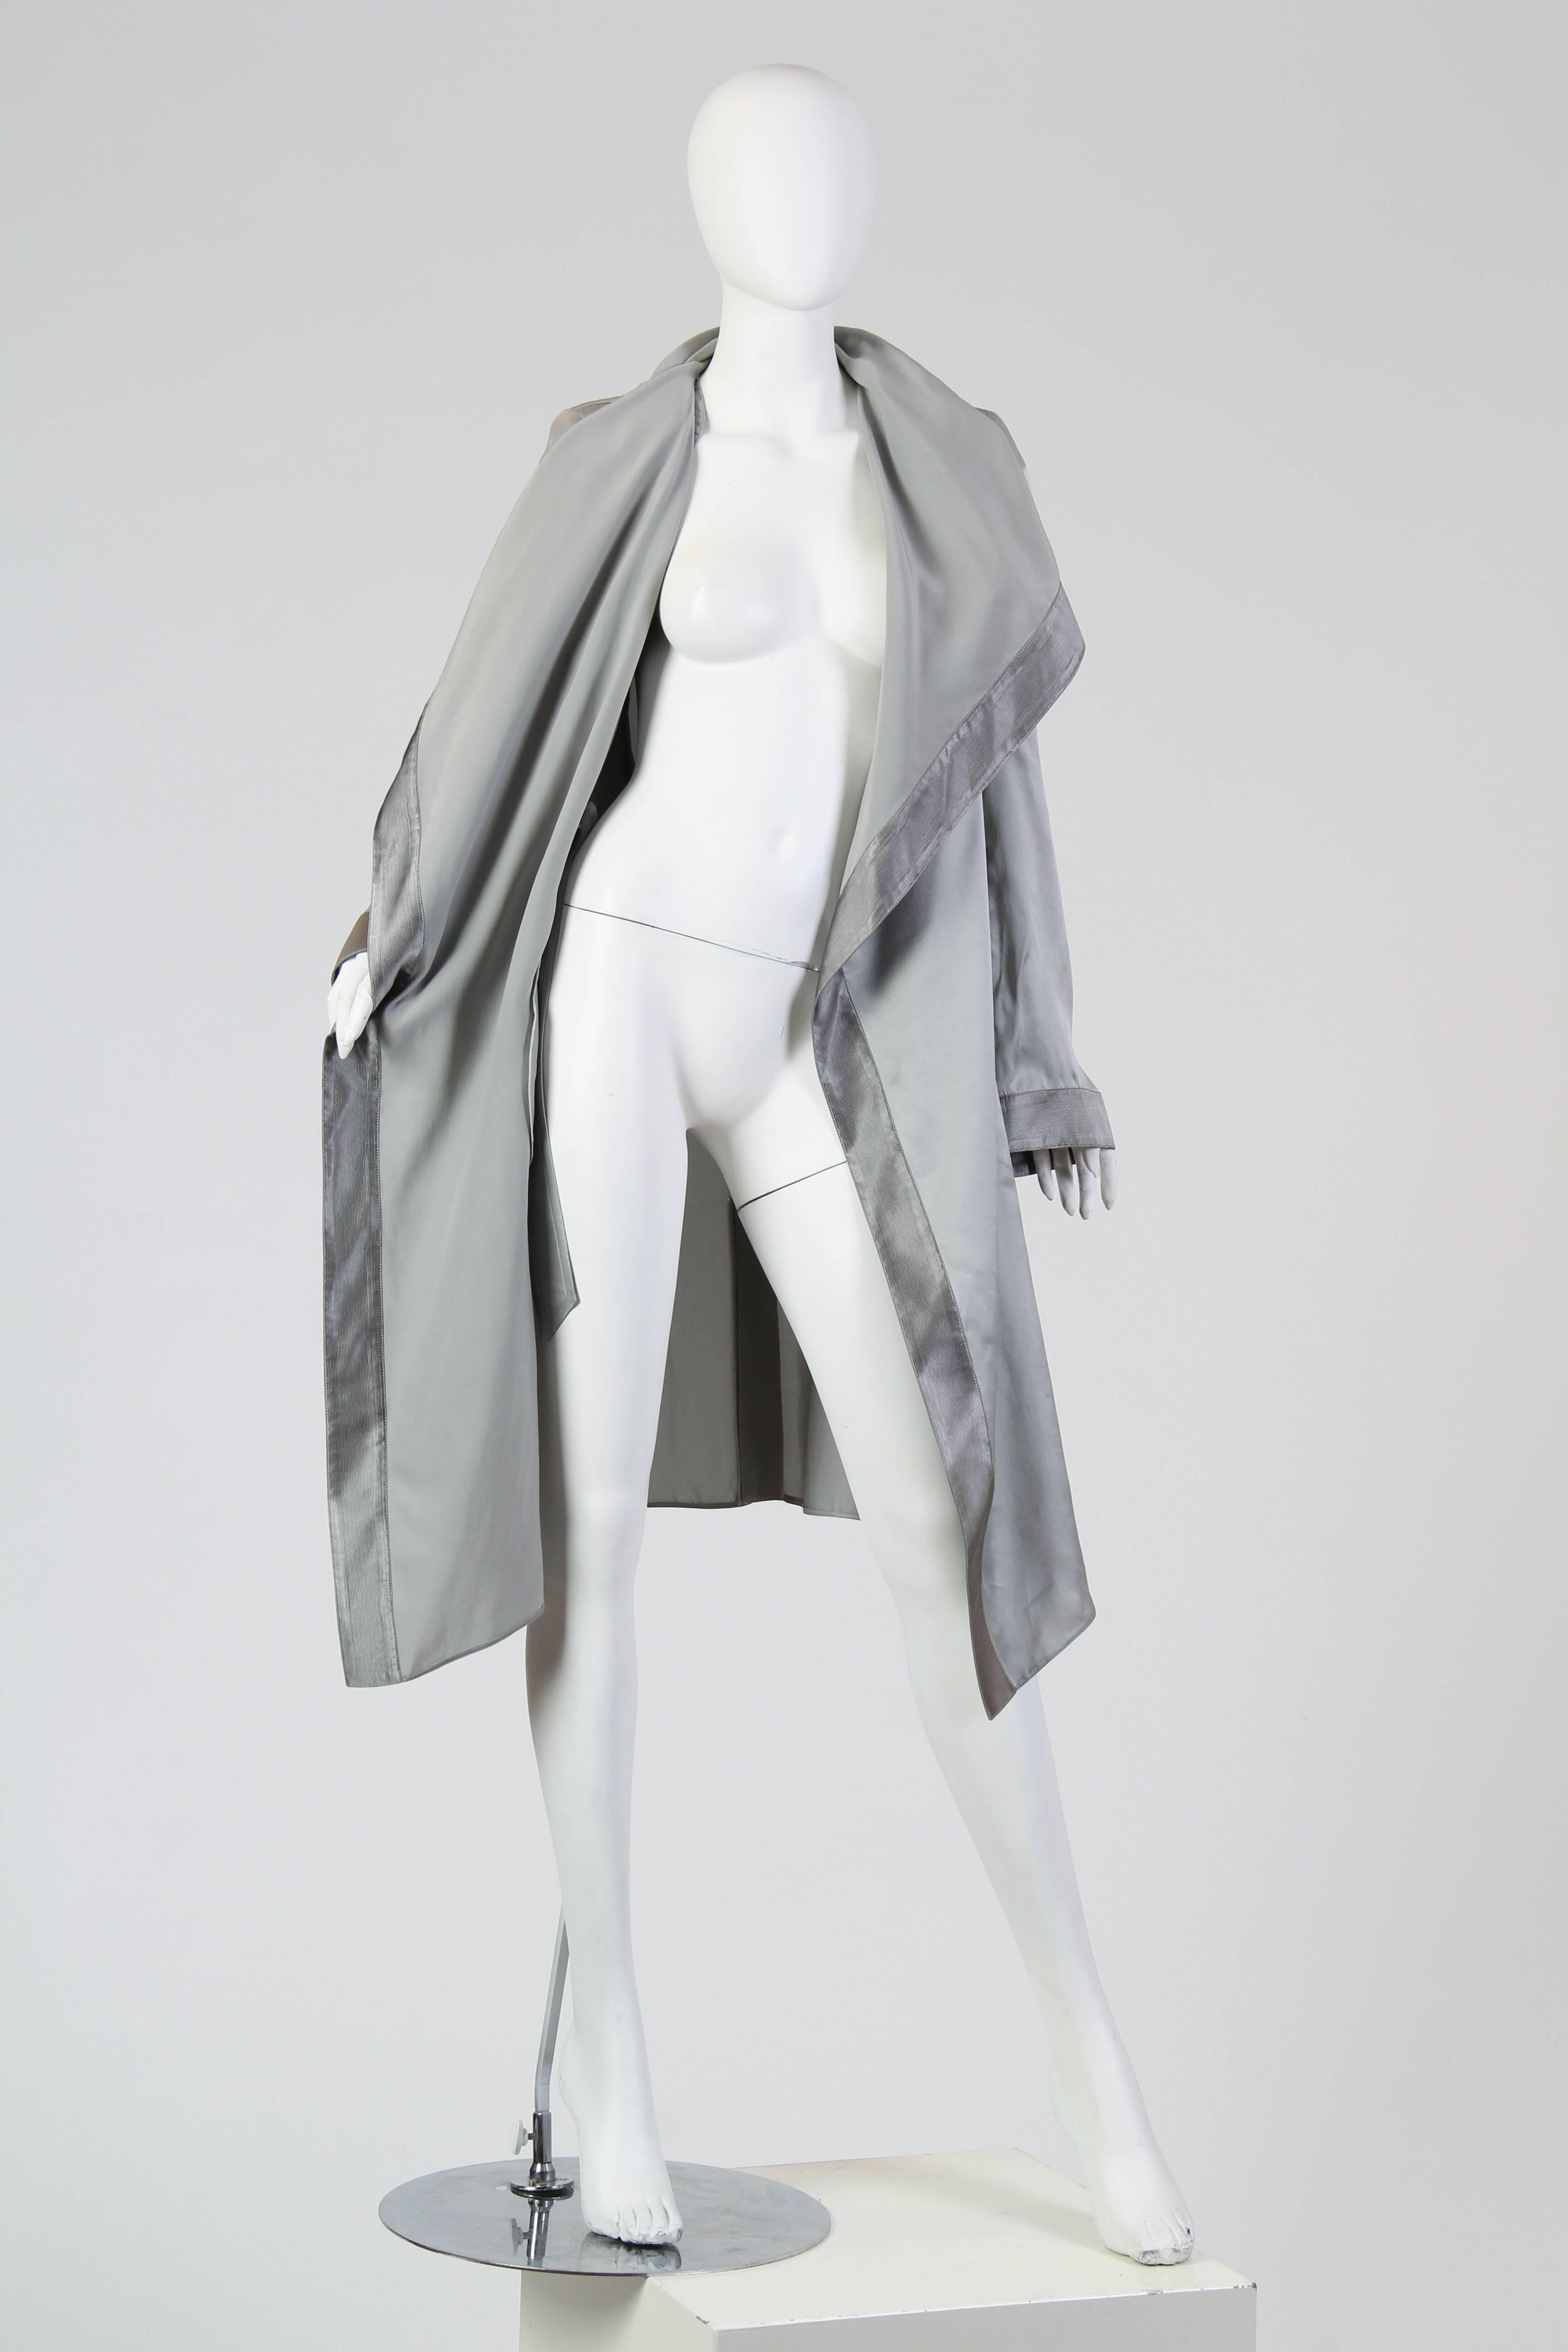 This is a wonderful trench coat of silver satin with a huge shawl collar. Darker satin borders define the edges of the coat without looking stark or jarring, and keep the silver looking elegant instead of glitzy. The fabric's natural drape has been